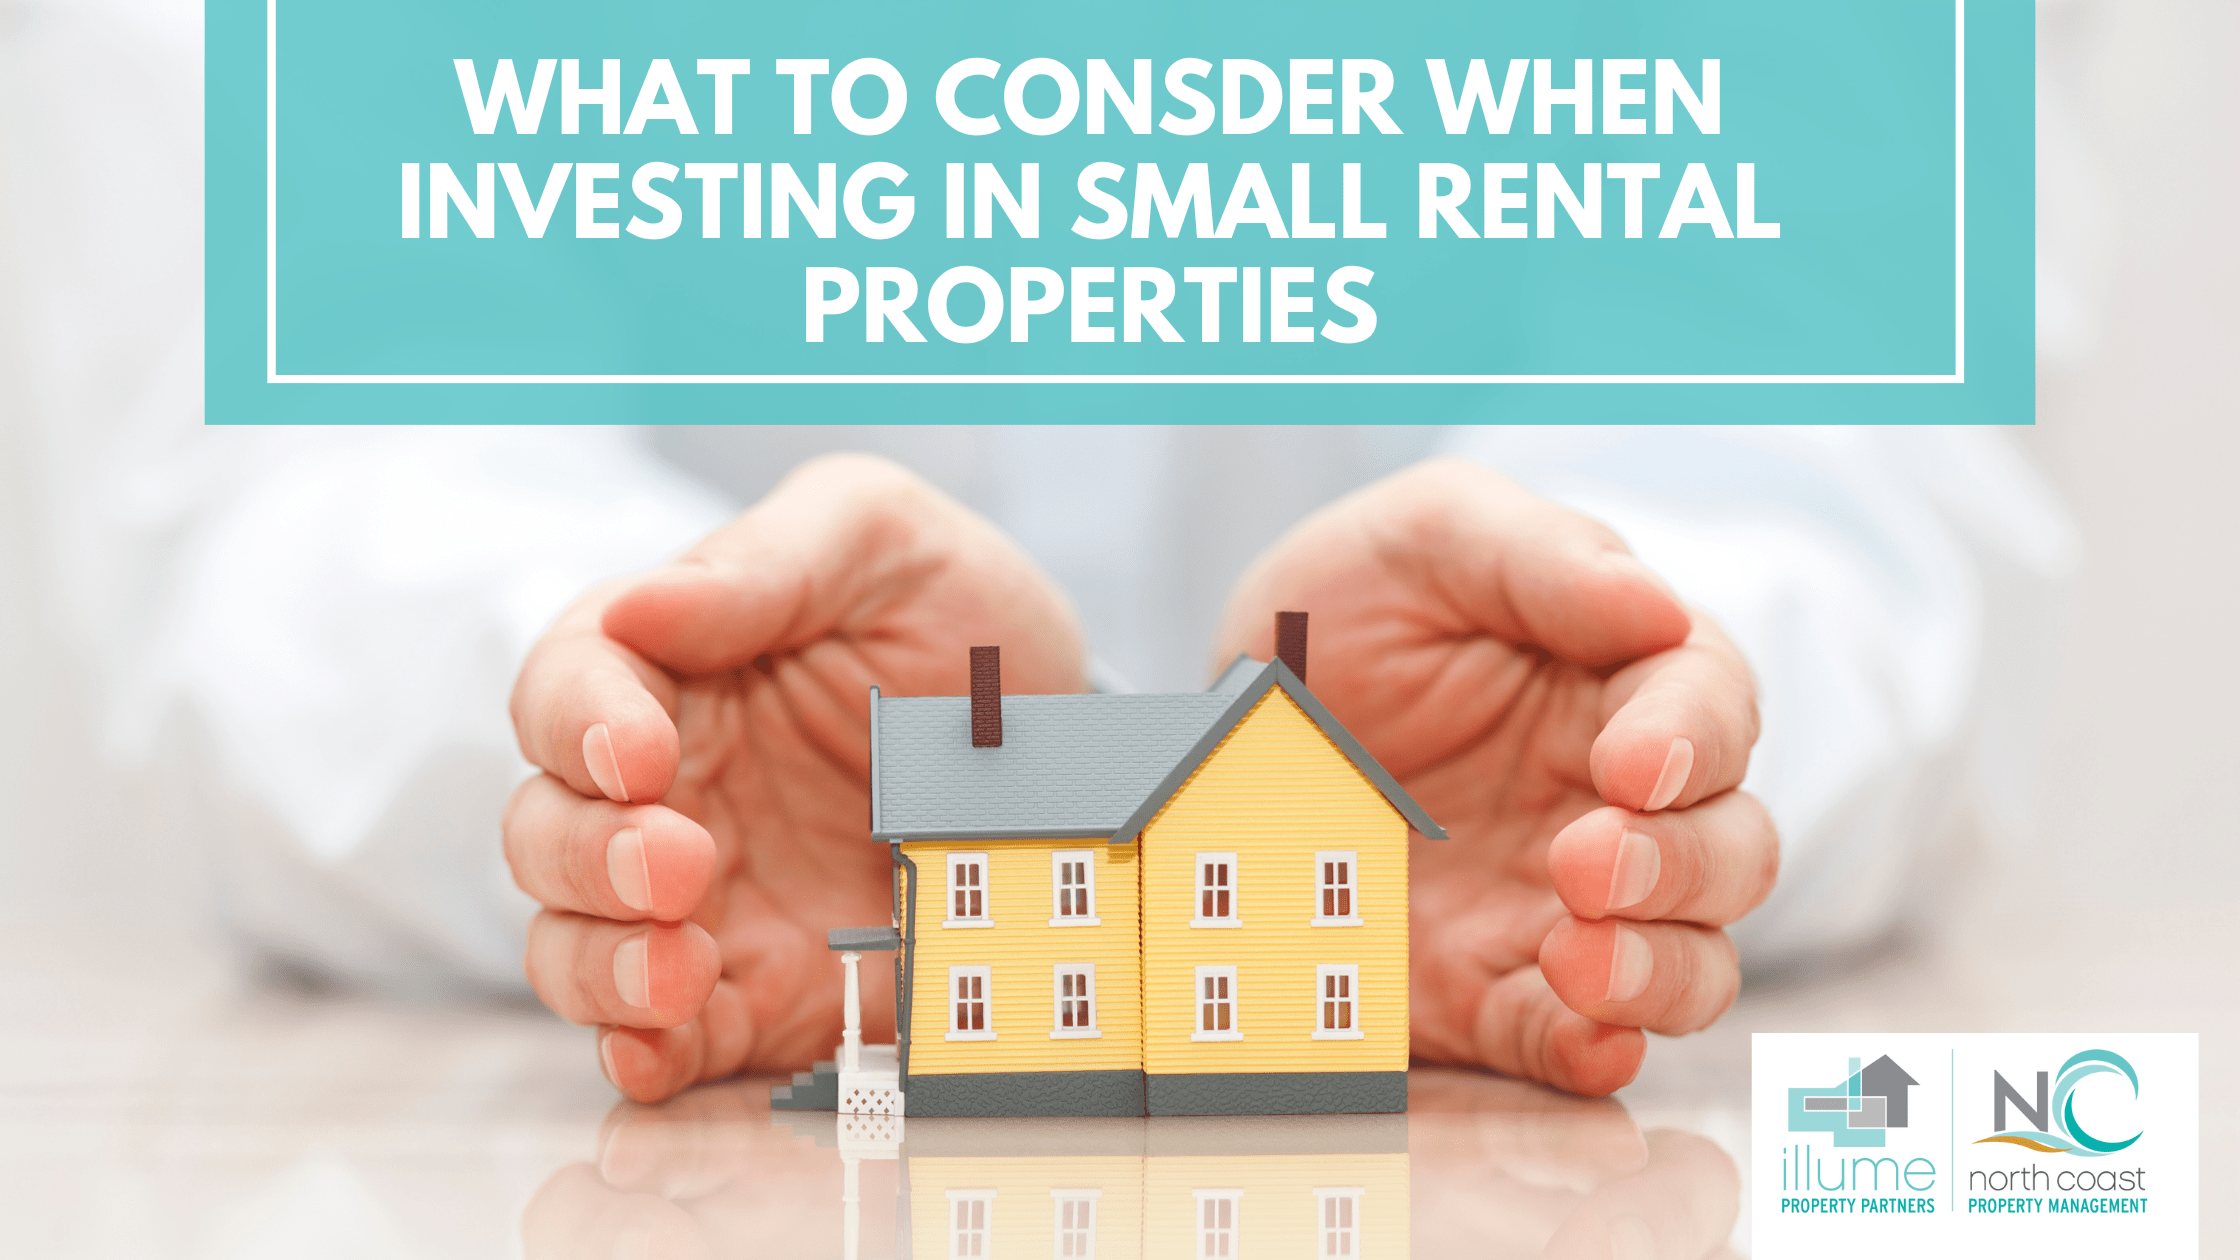 What to Consider When Investing in Small Rental Properties